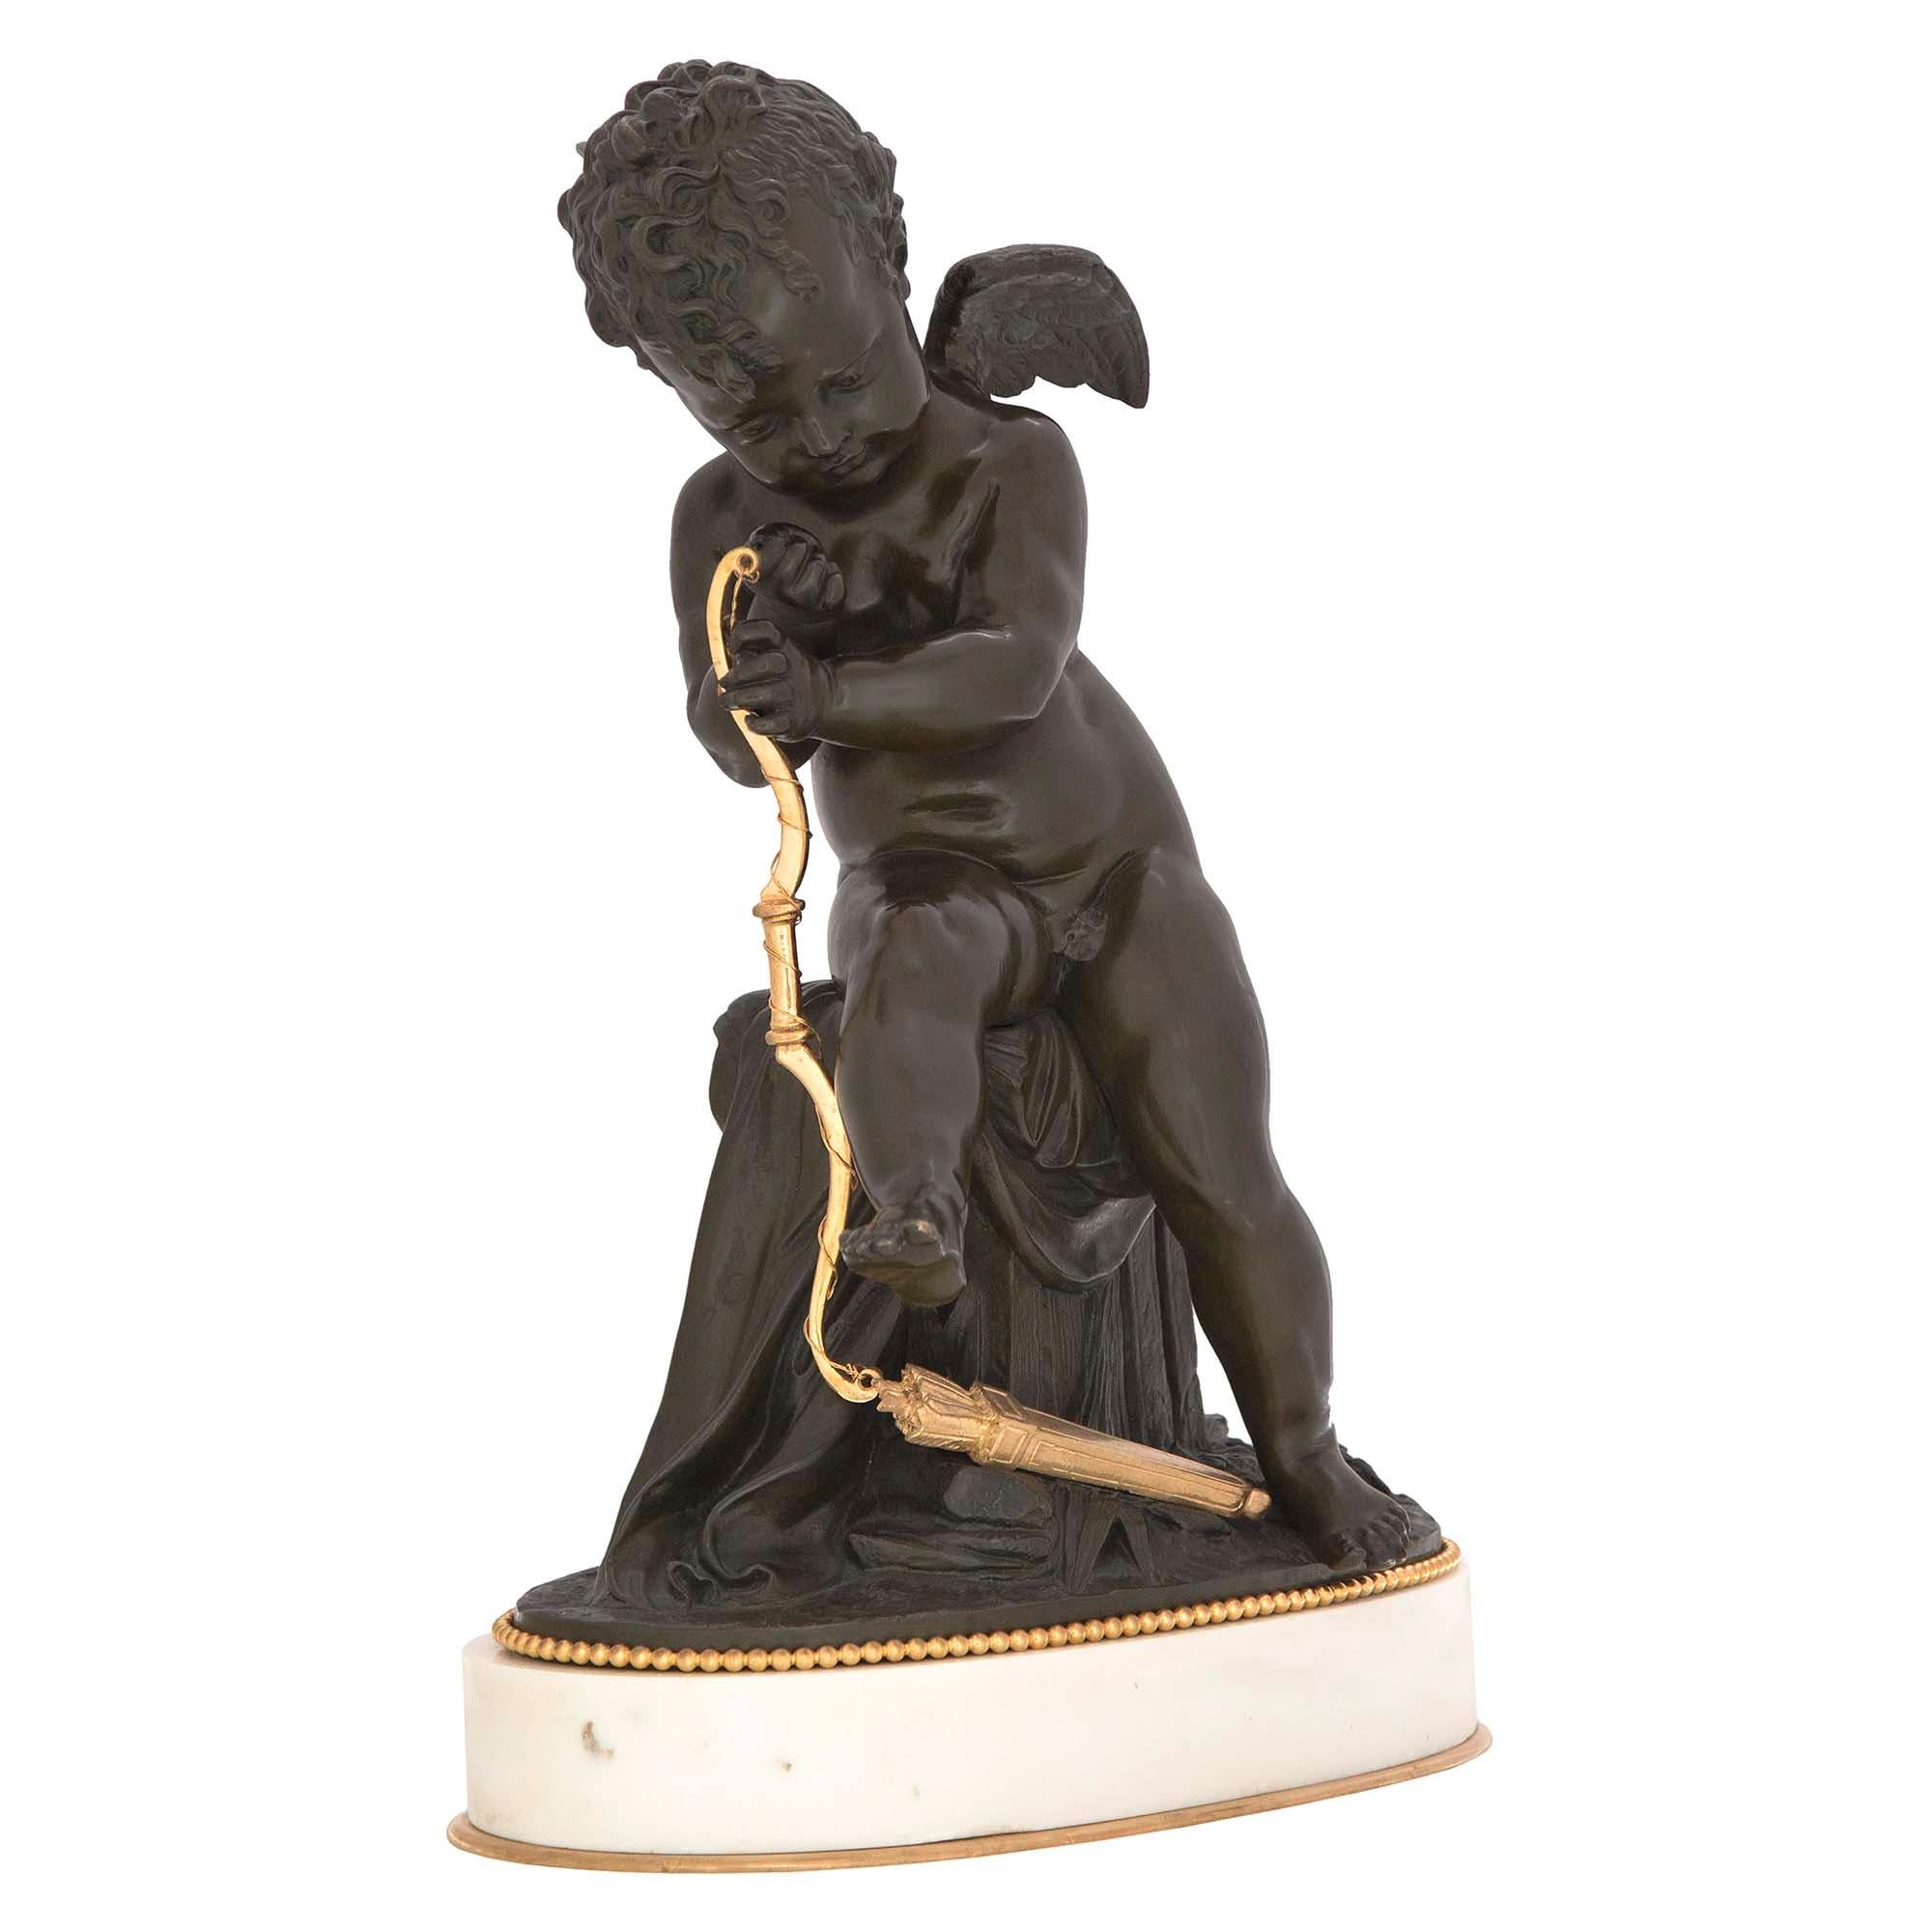 A high quality and most charming French 19th century Louis XVI st. patinated bronze, ormolu and white Carrara marble statue signed Lemire. The statue is raised by an oval white Carrara marble base with a bottom ormolu fillet and a decorative beaded